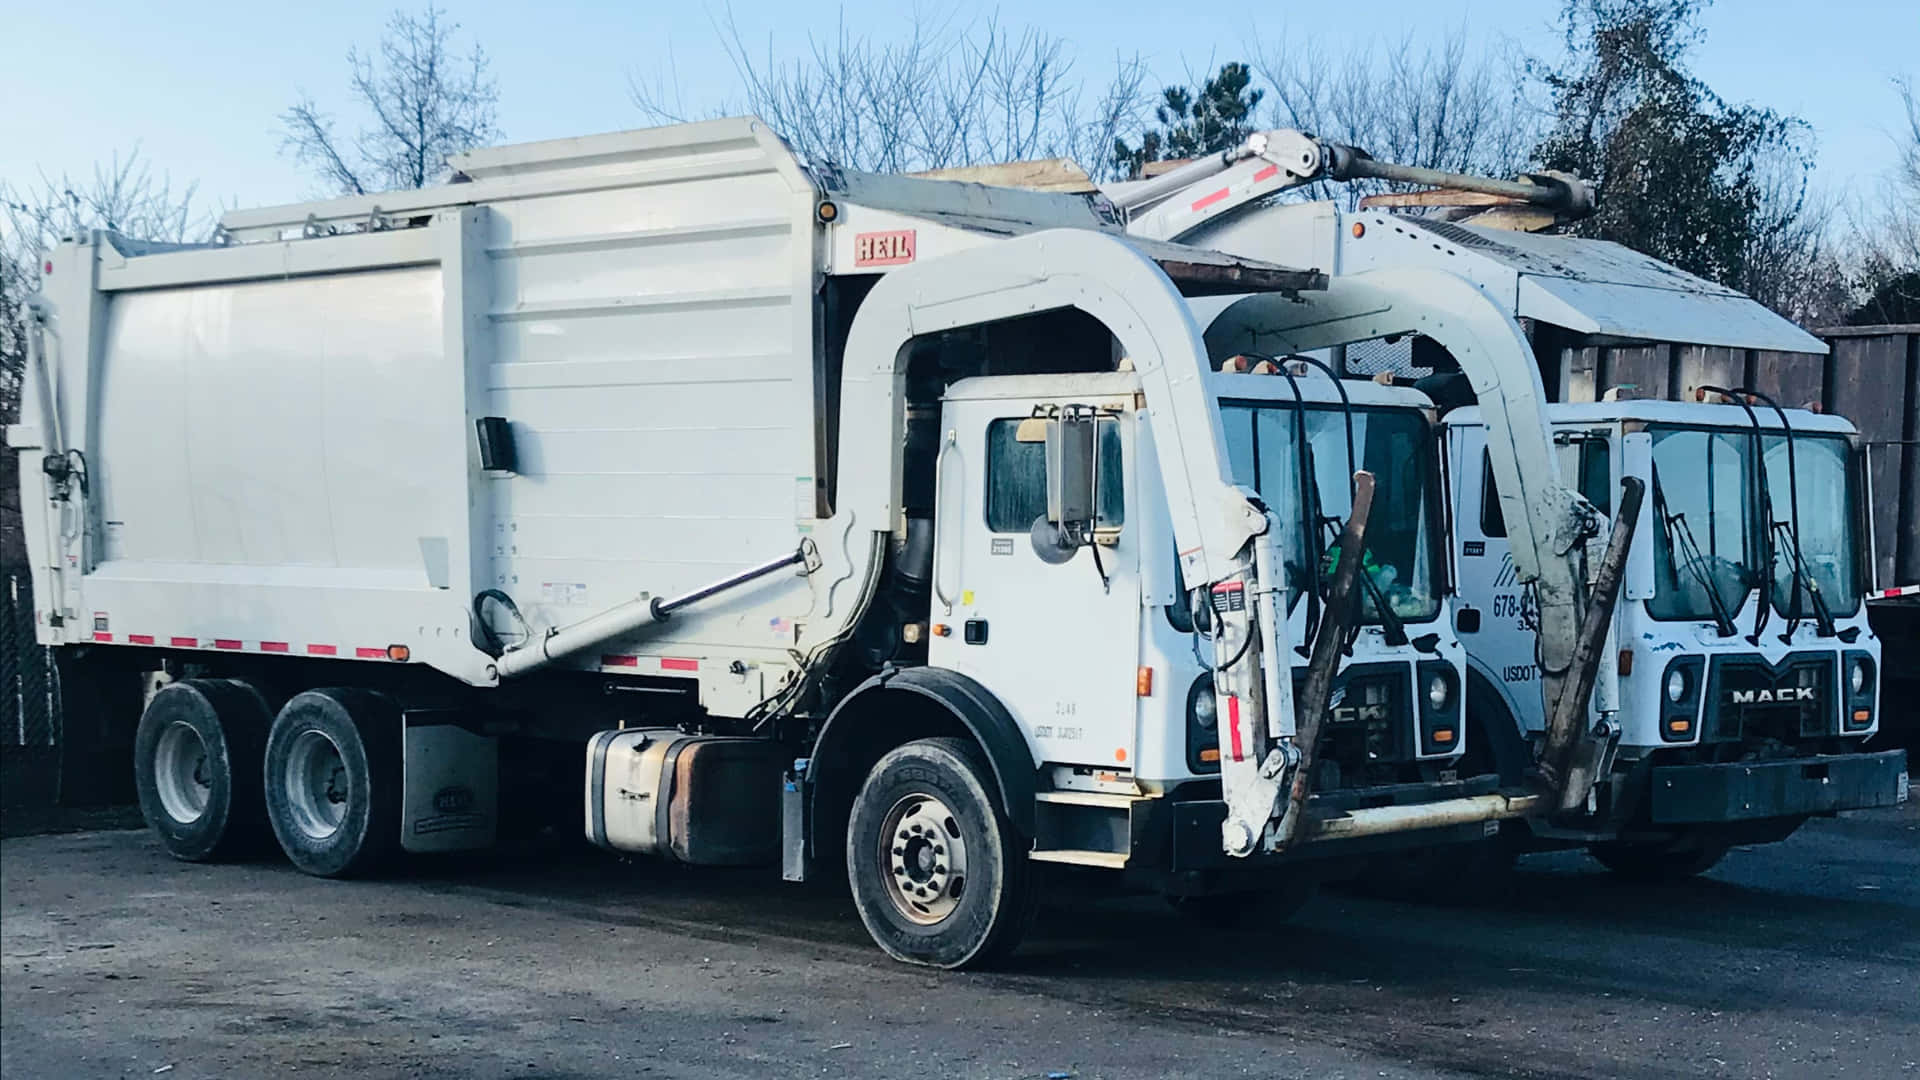 Two White Garbage Trucks Parked In A Parking Lot